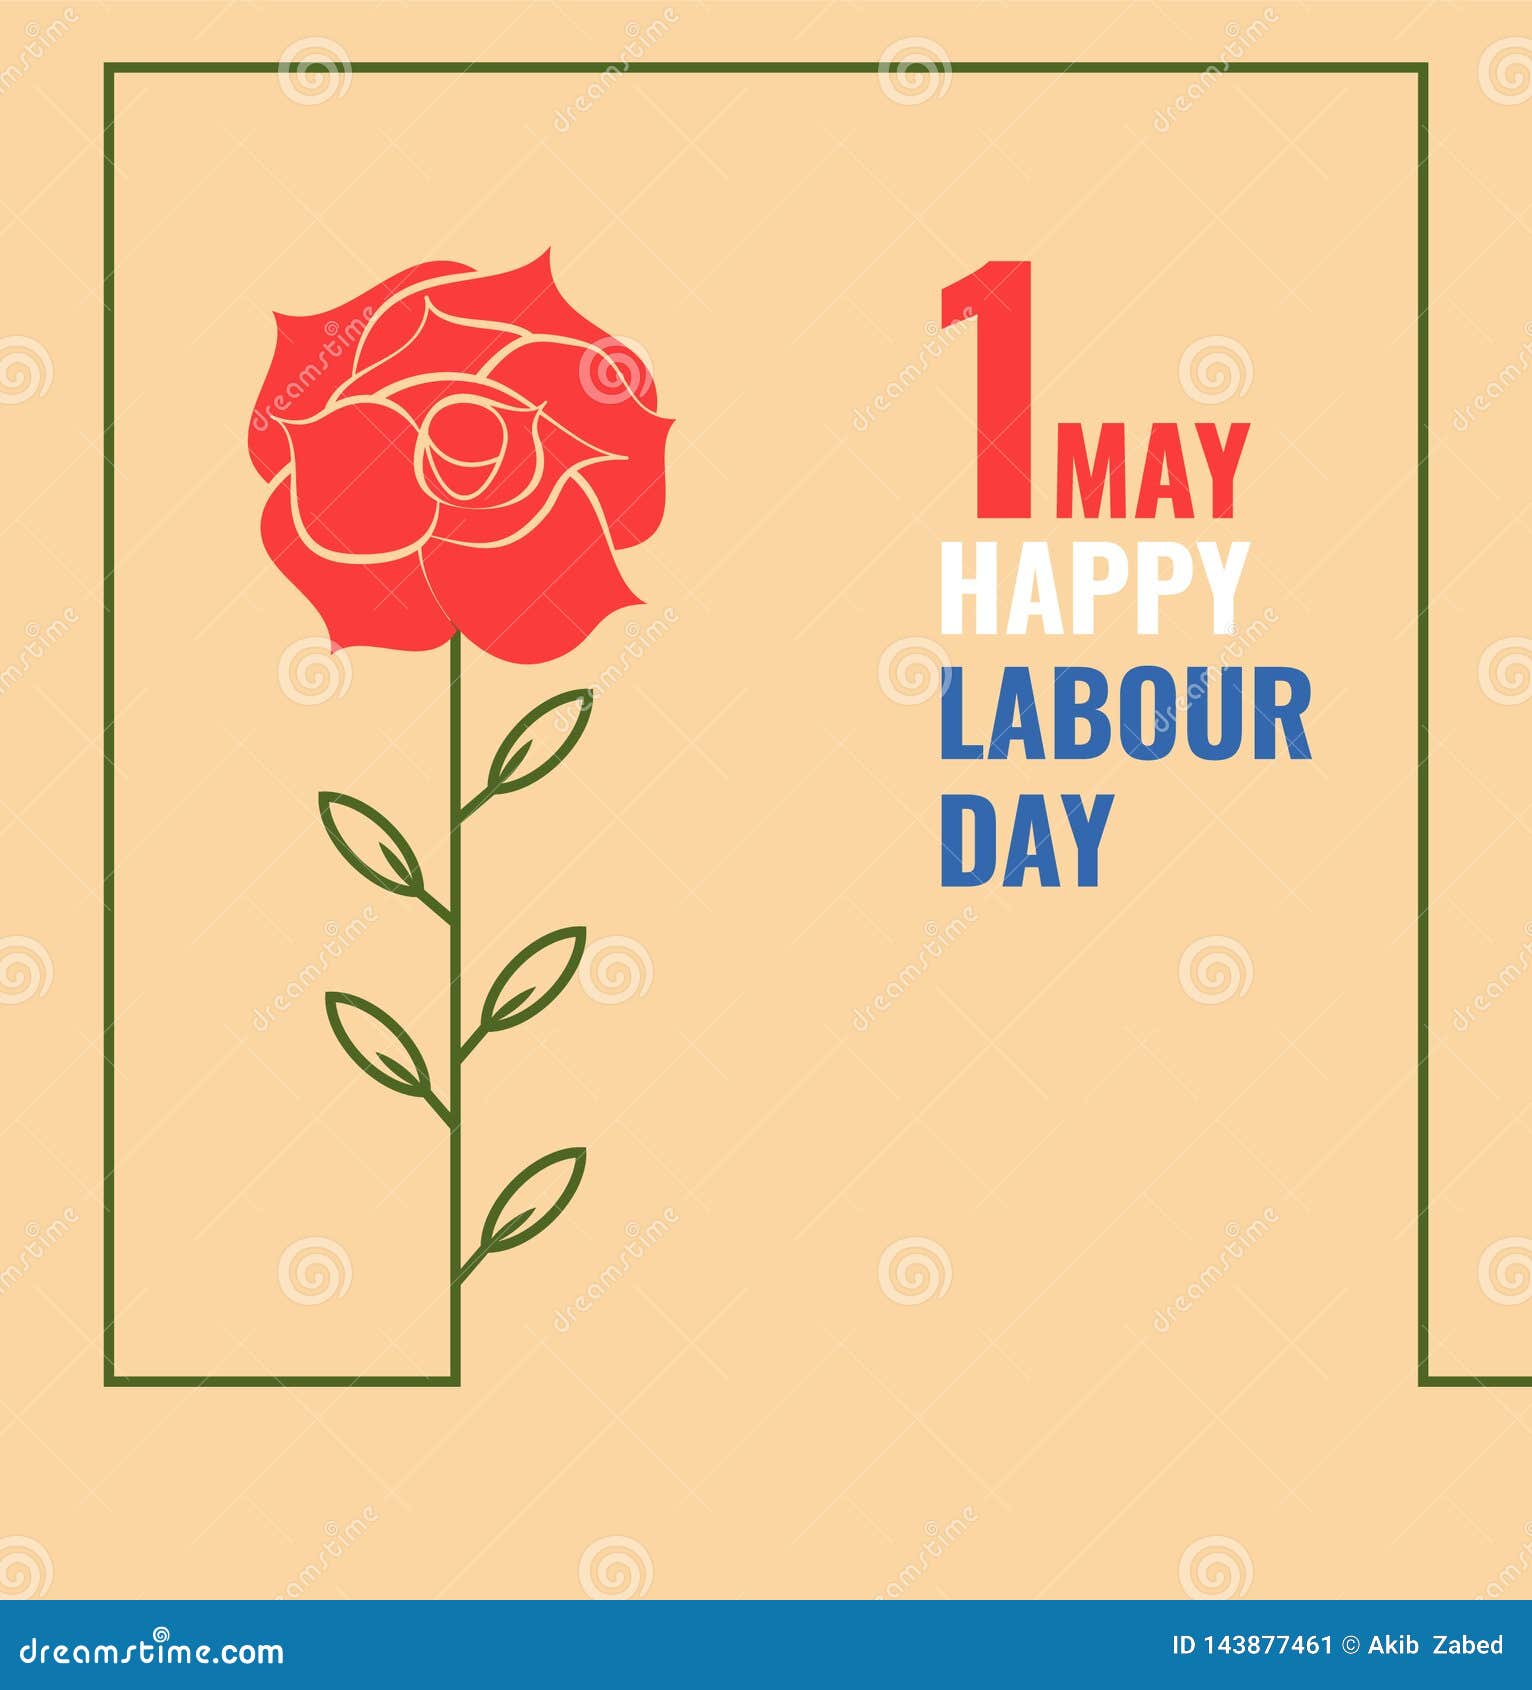 happy labour day with rose greeting card